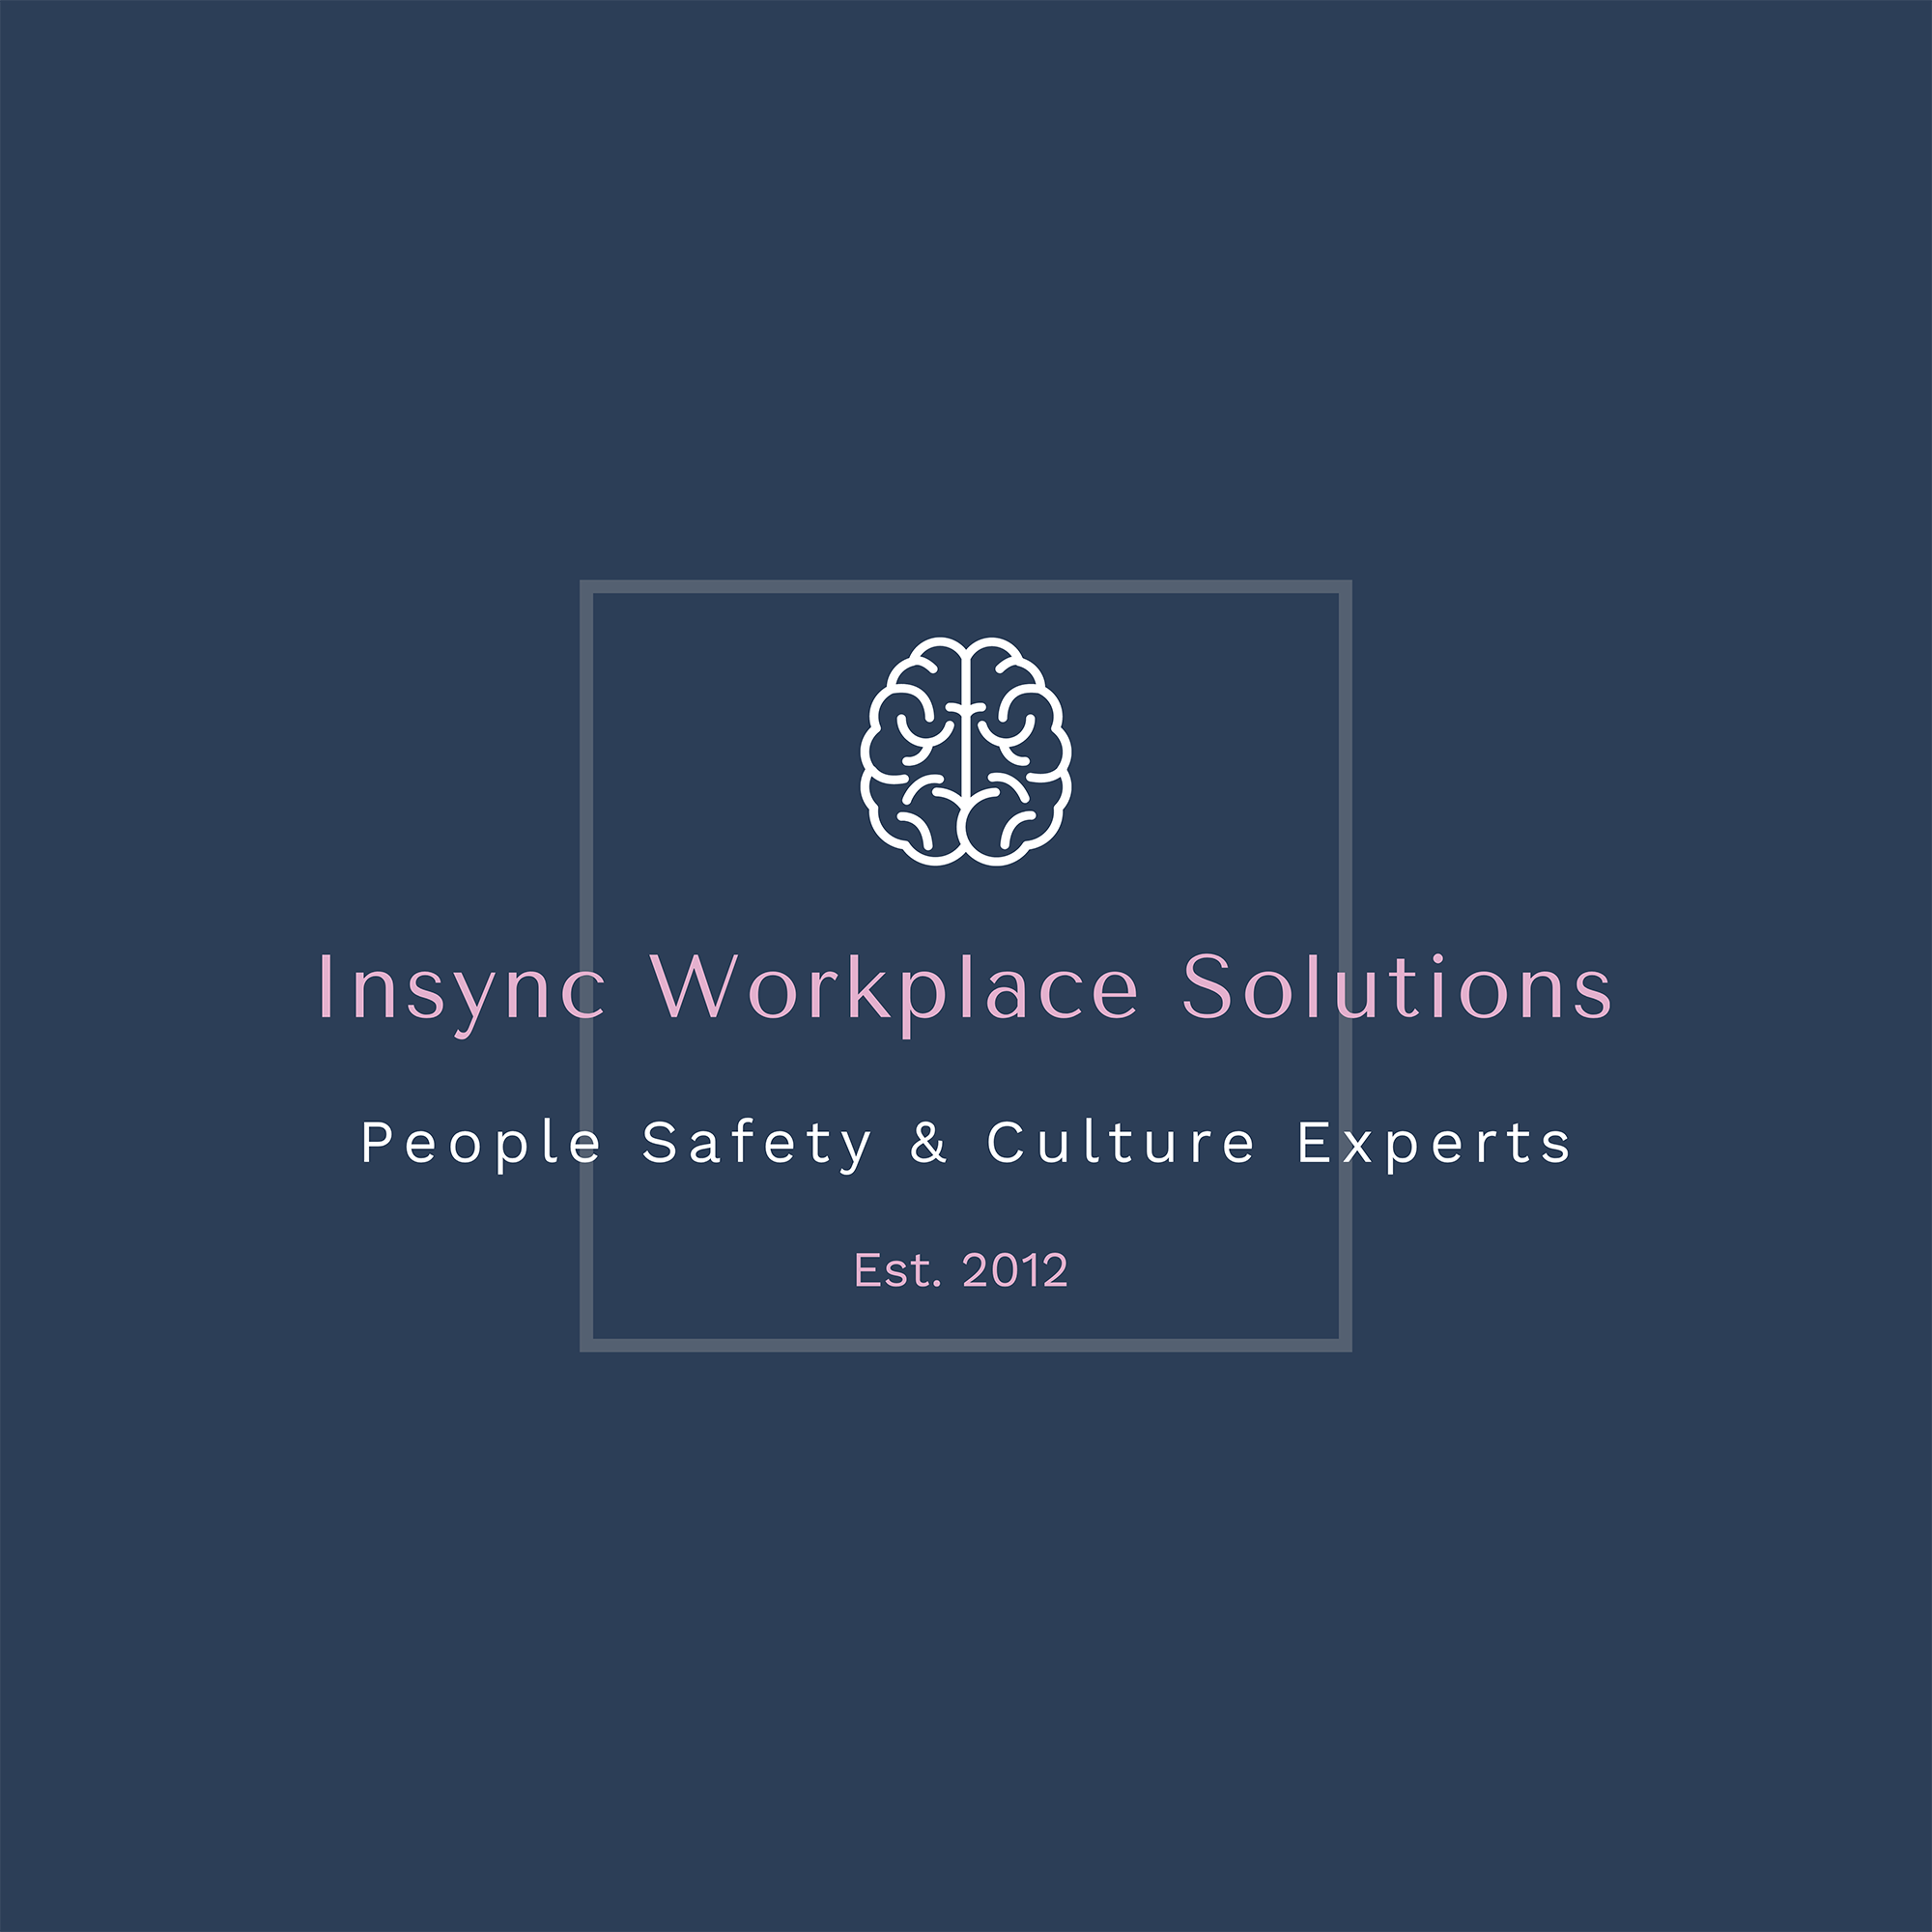 Insync Workplace Solutions